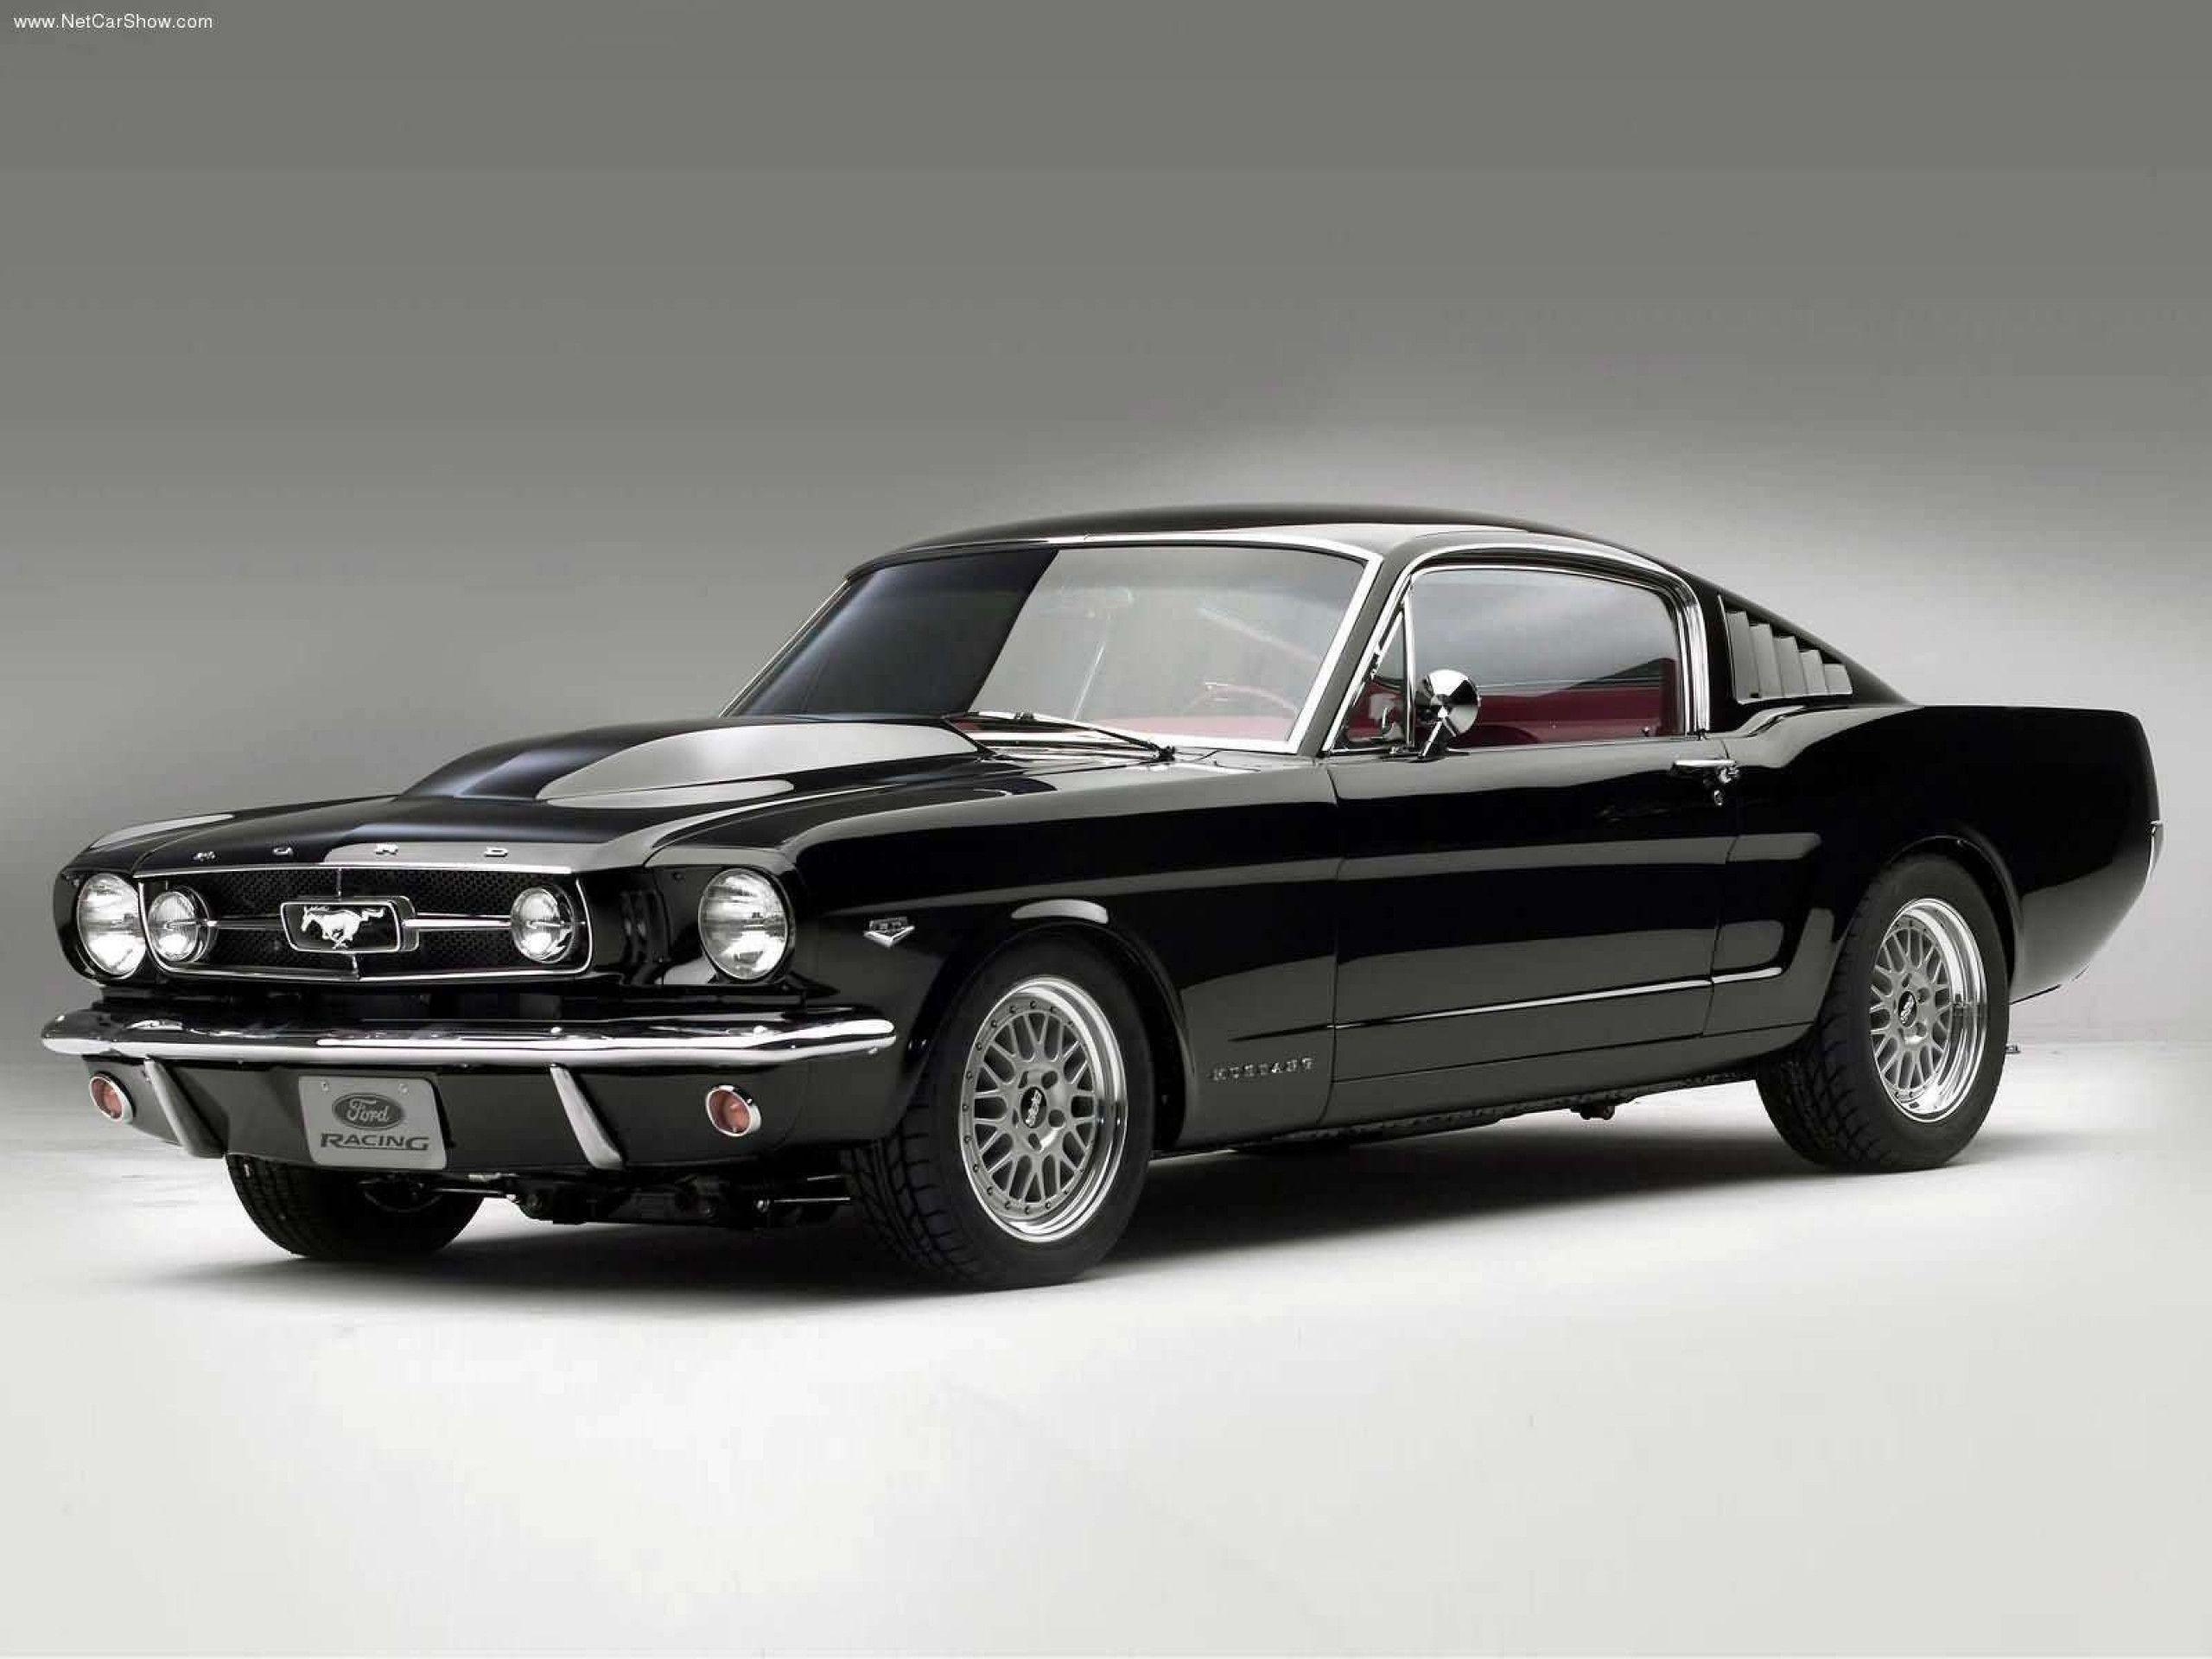 1965 Ford Mustang Fastback Wallpaper Ford Mustang